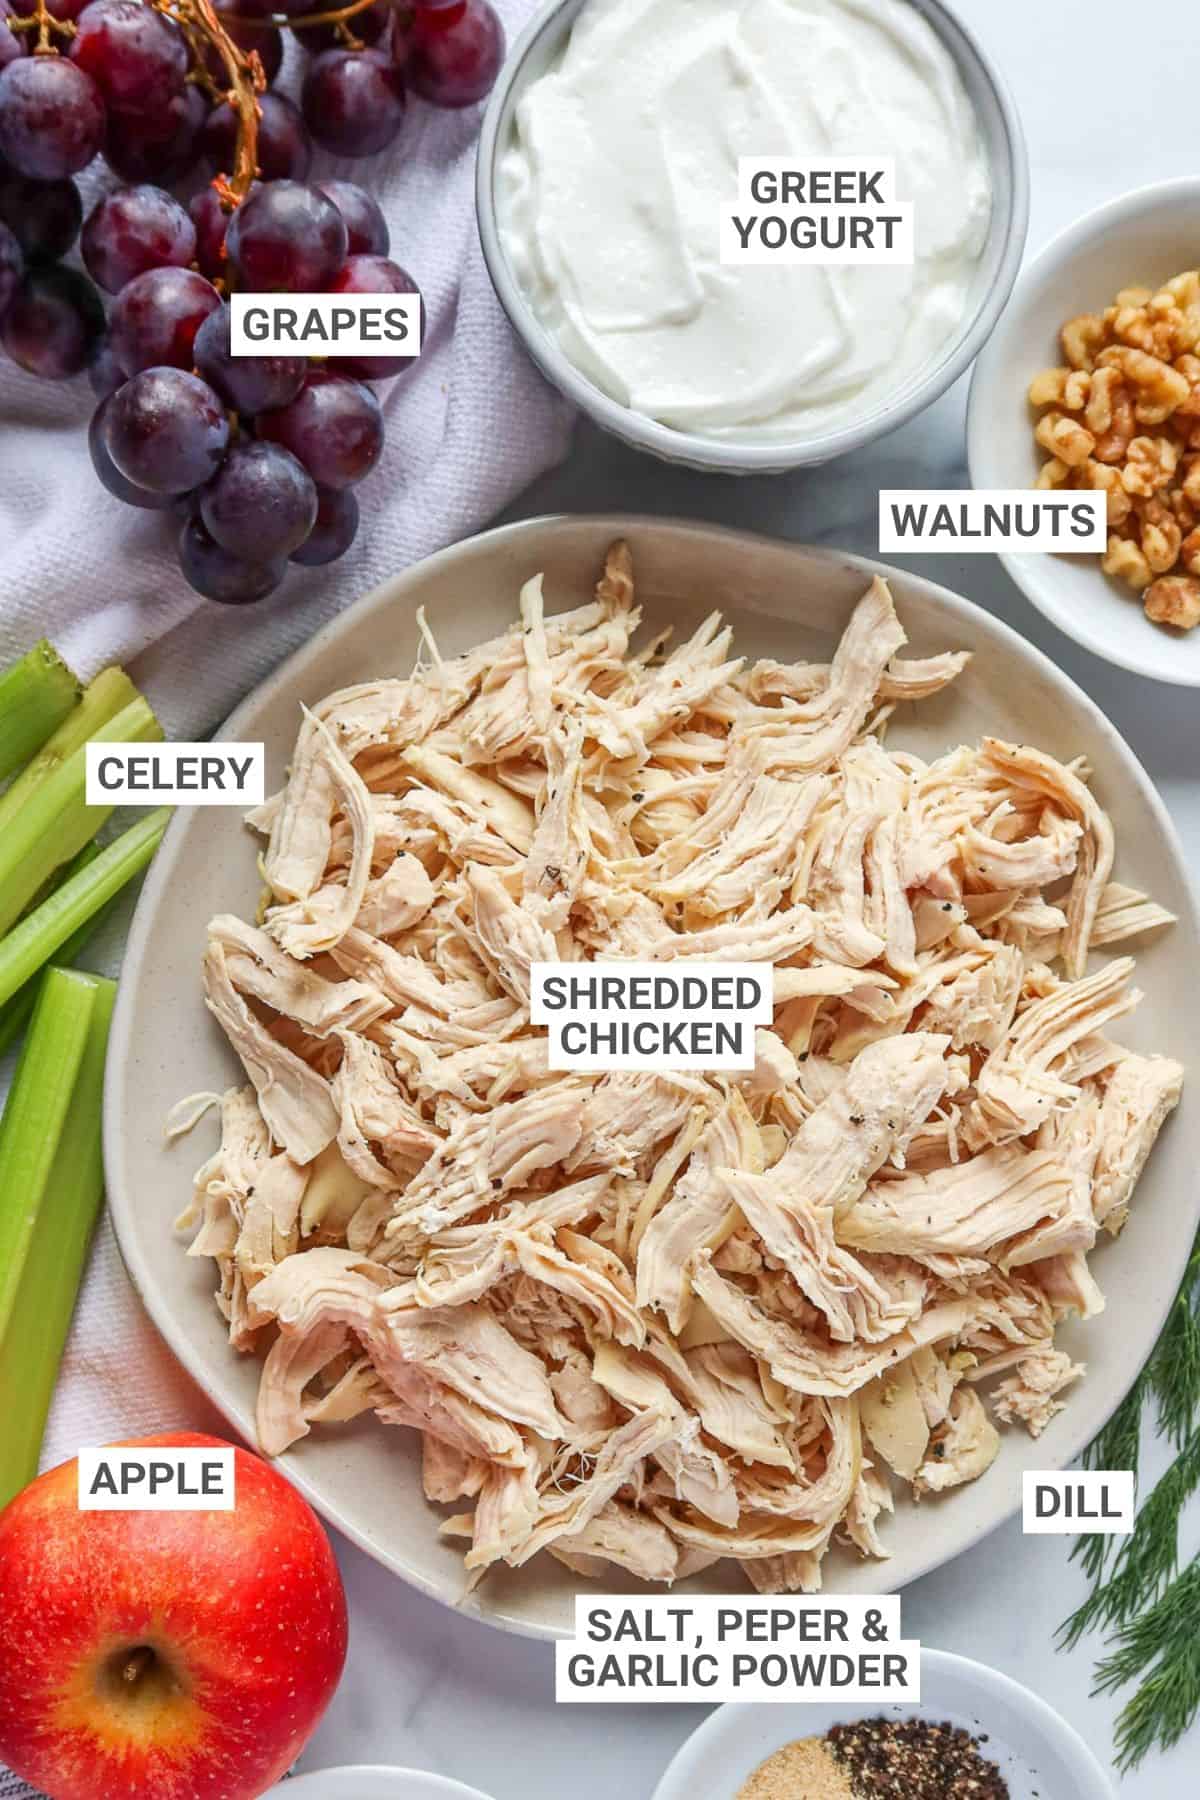 Chicken salad ingredients arranged on a countertop with text overlay labels.